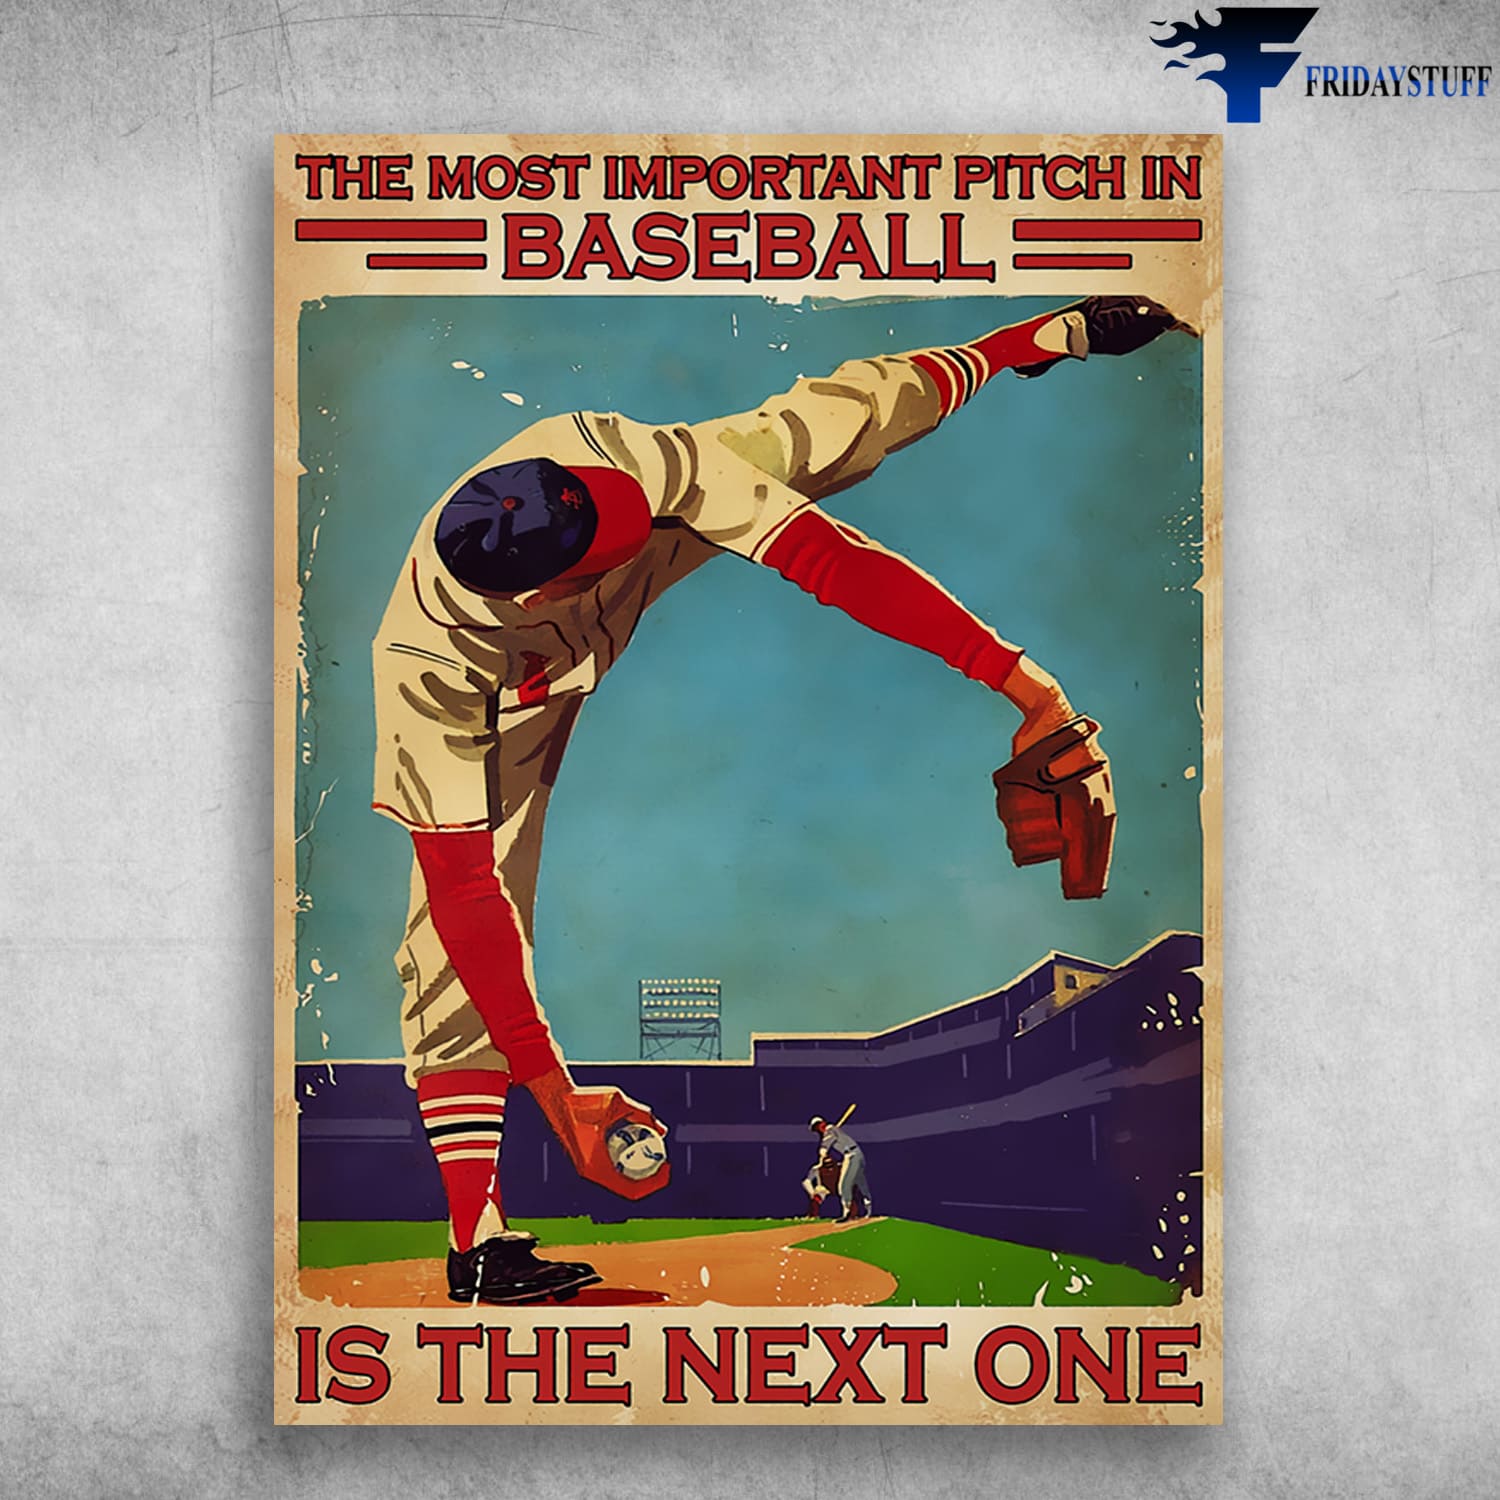 Baseball Player, Baseball Poster, The Most Important Pitch In Baseball, Is  The Next One - FridayStuff